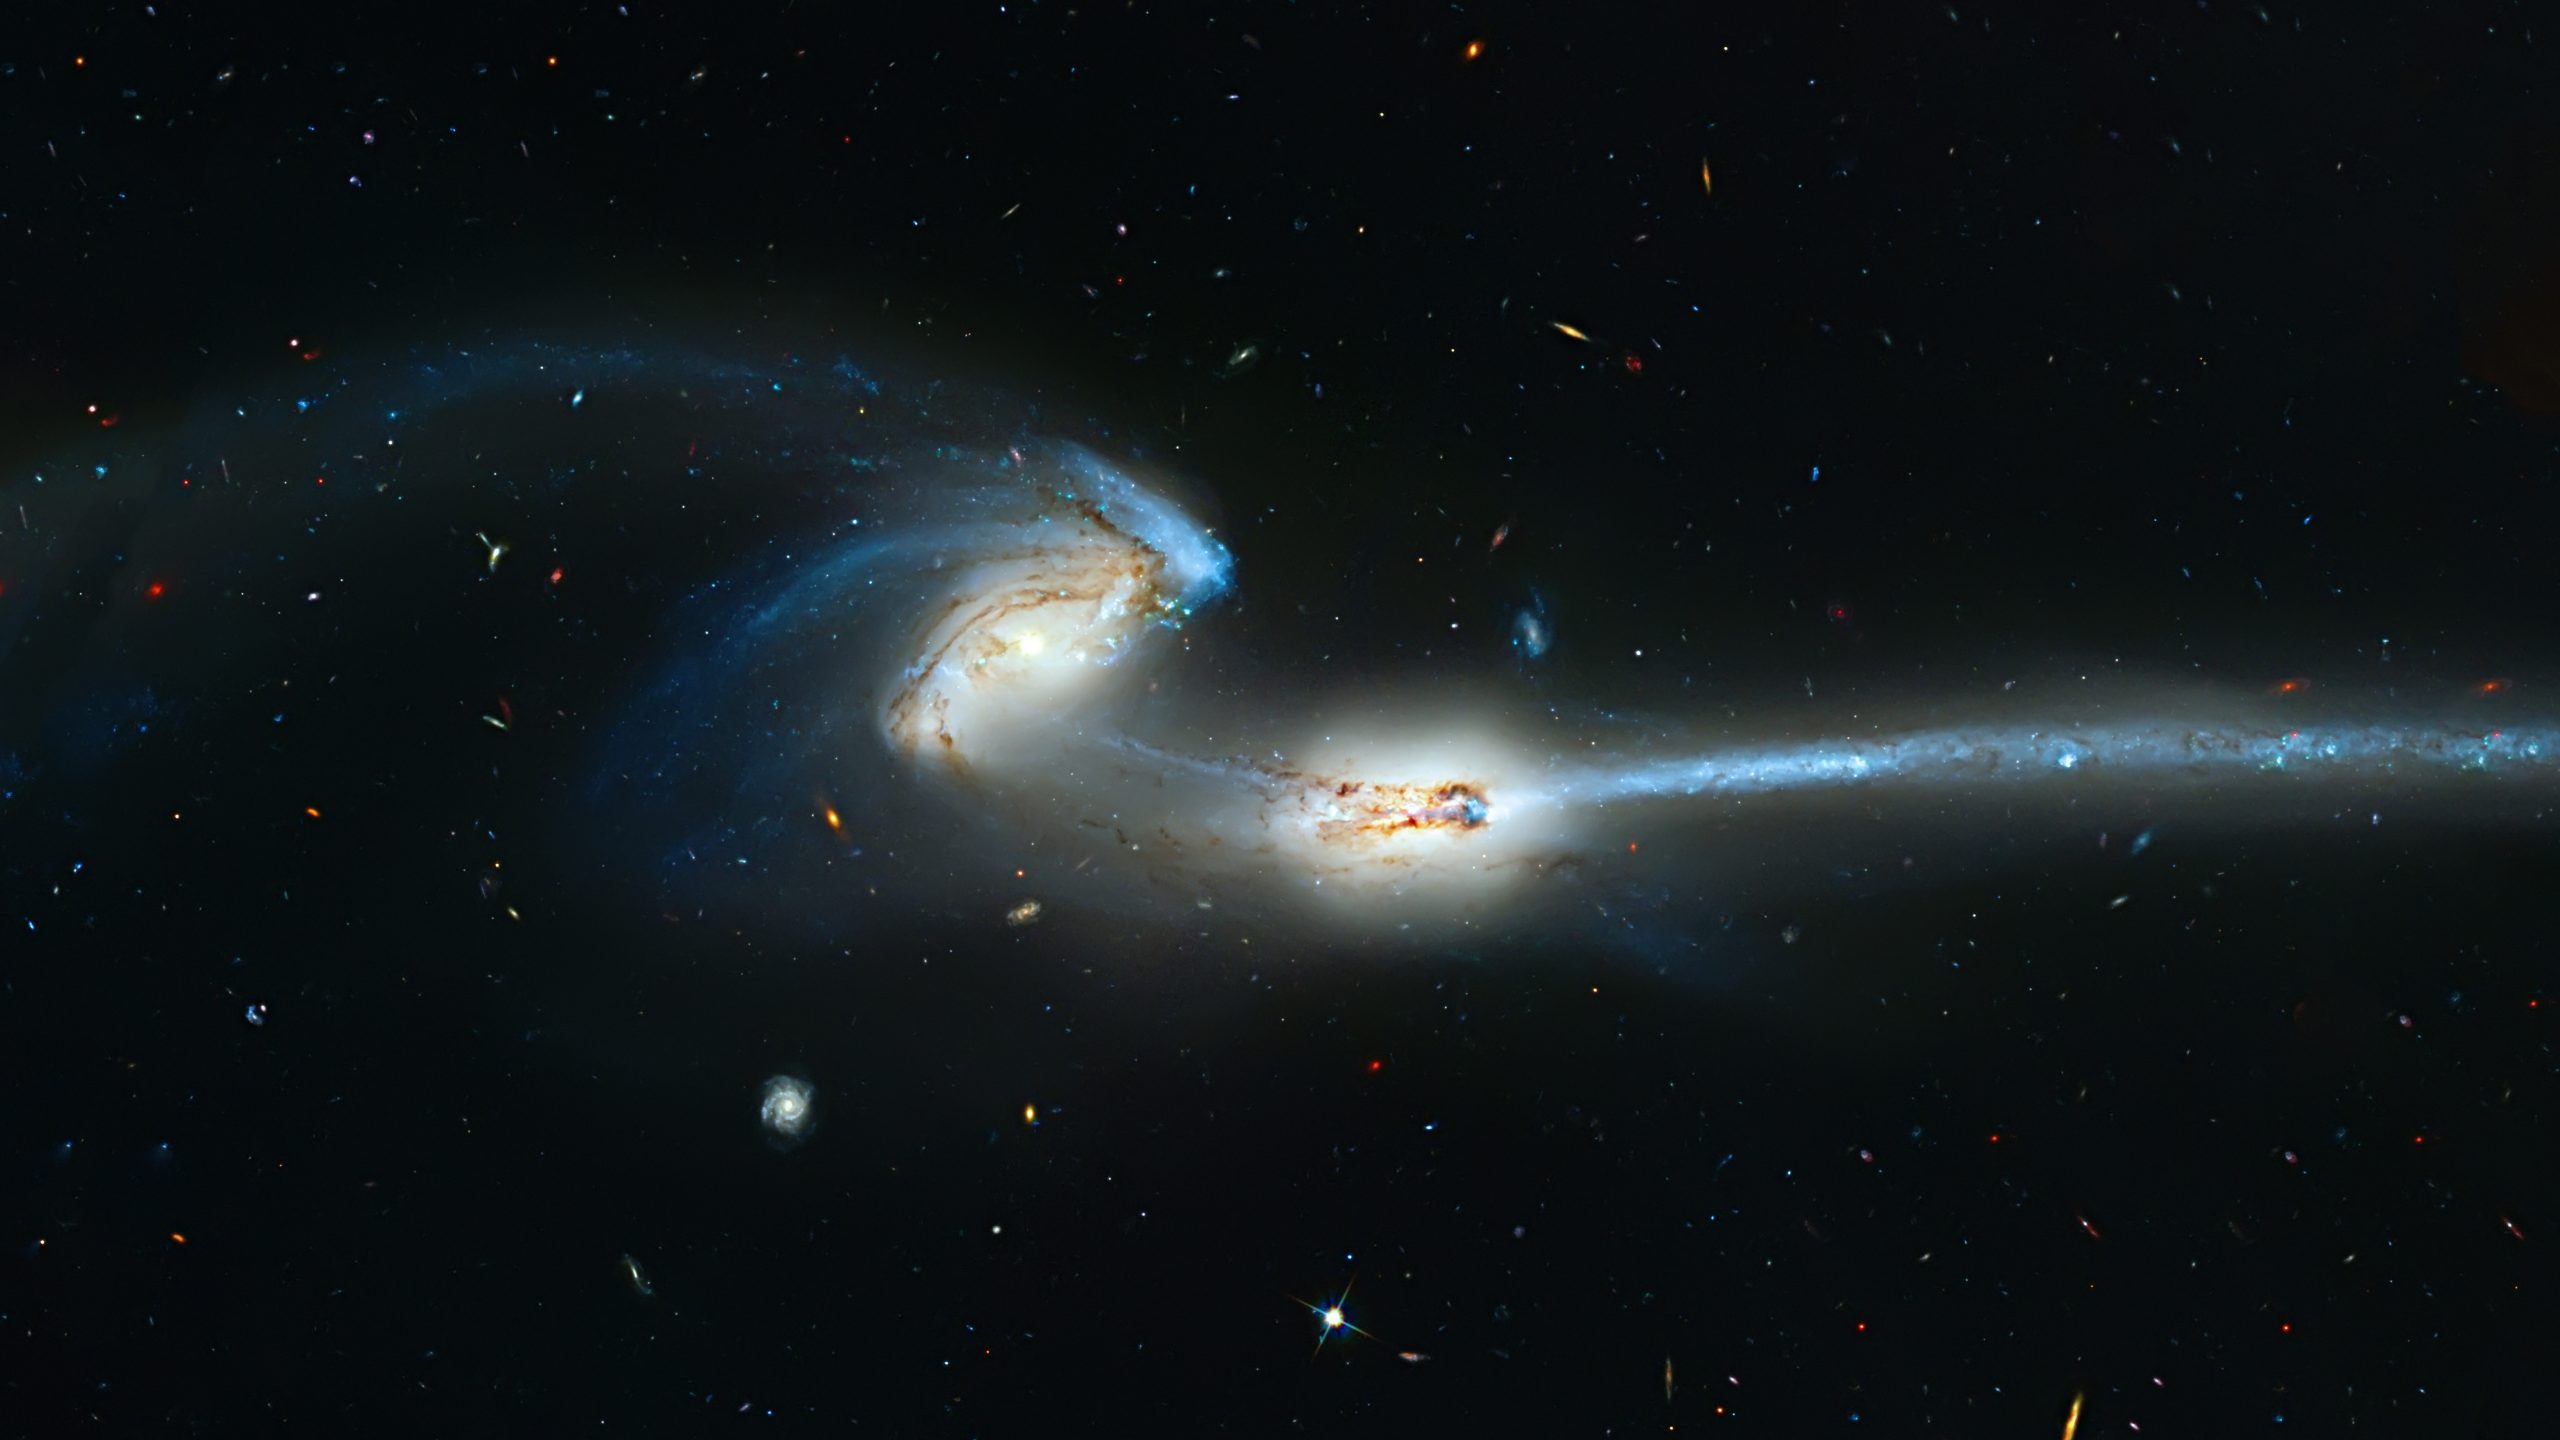 Colliding Galaxies in the constellation Coma Berenices. Depositphotos.